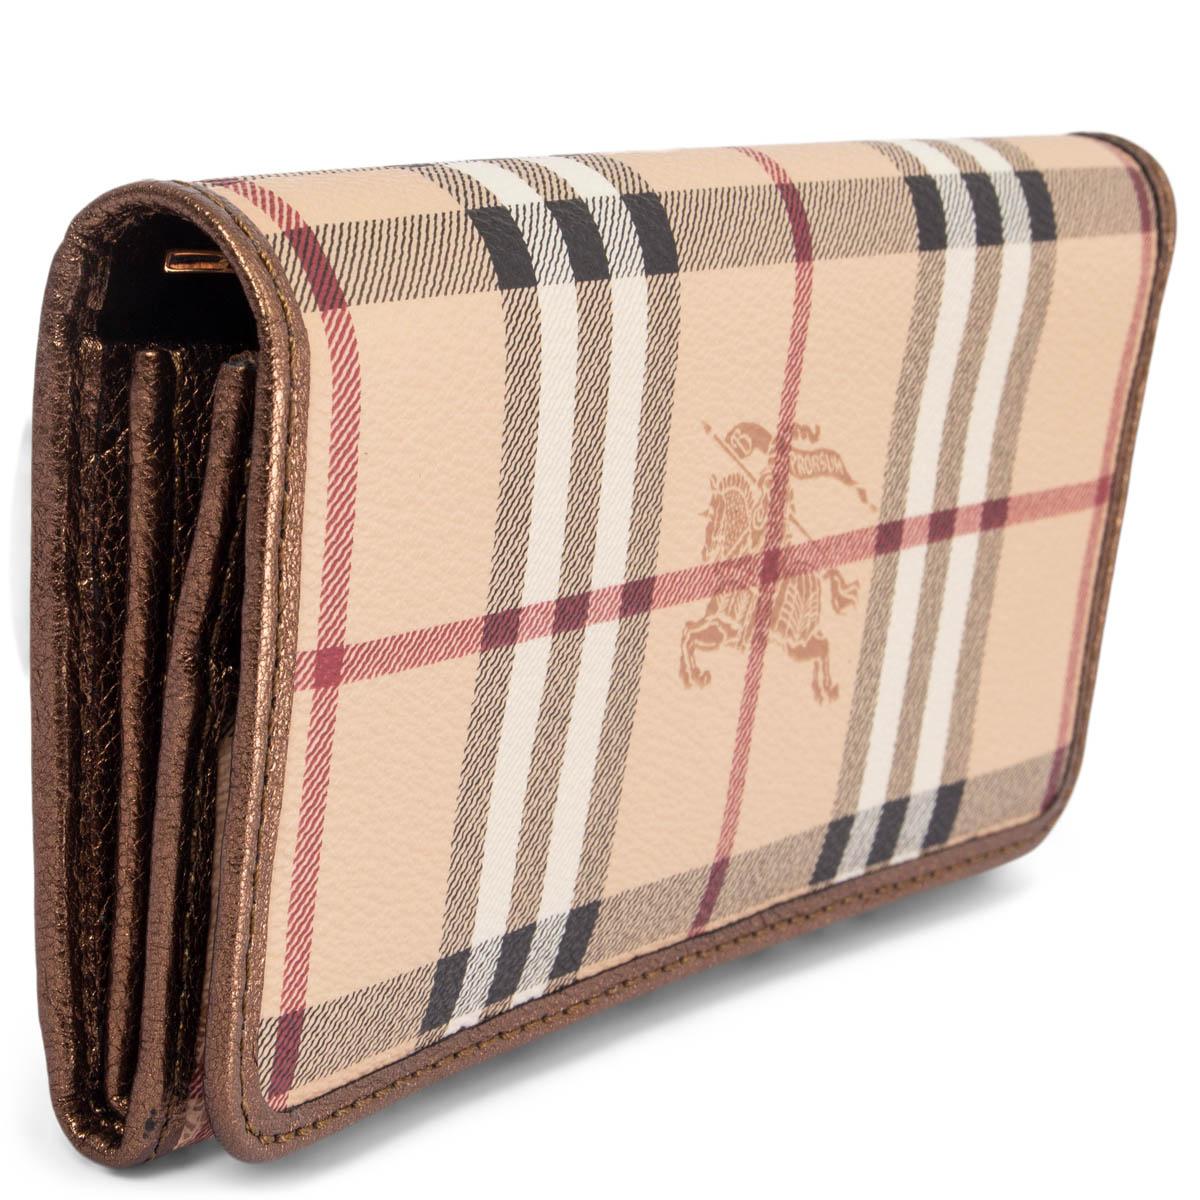 100% authentic Burberry Prorsum classic check wallet in beige, red, black and white coated canvas with bronze leather trim and lining. Opens with a push-button to 12 credit card slots, a big zipper coin pocket, 2 bill compartments and 4 slip